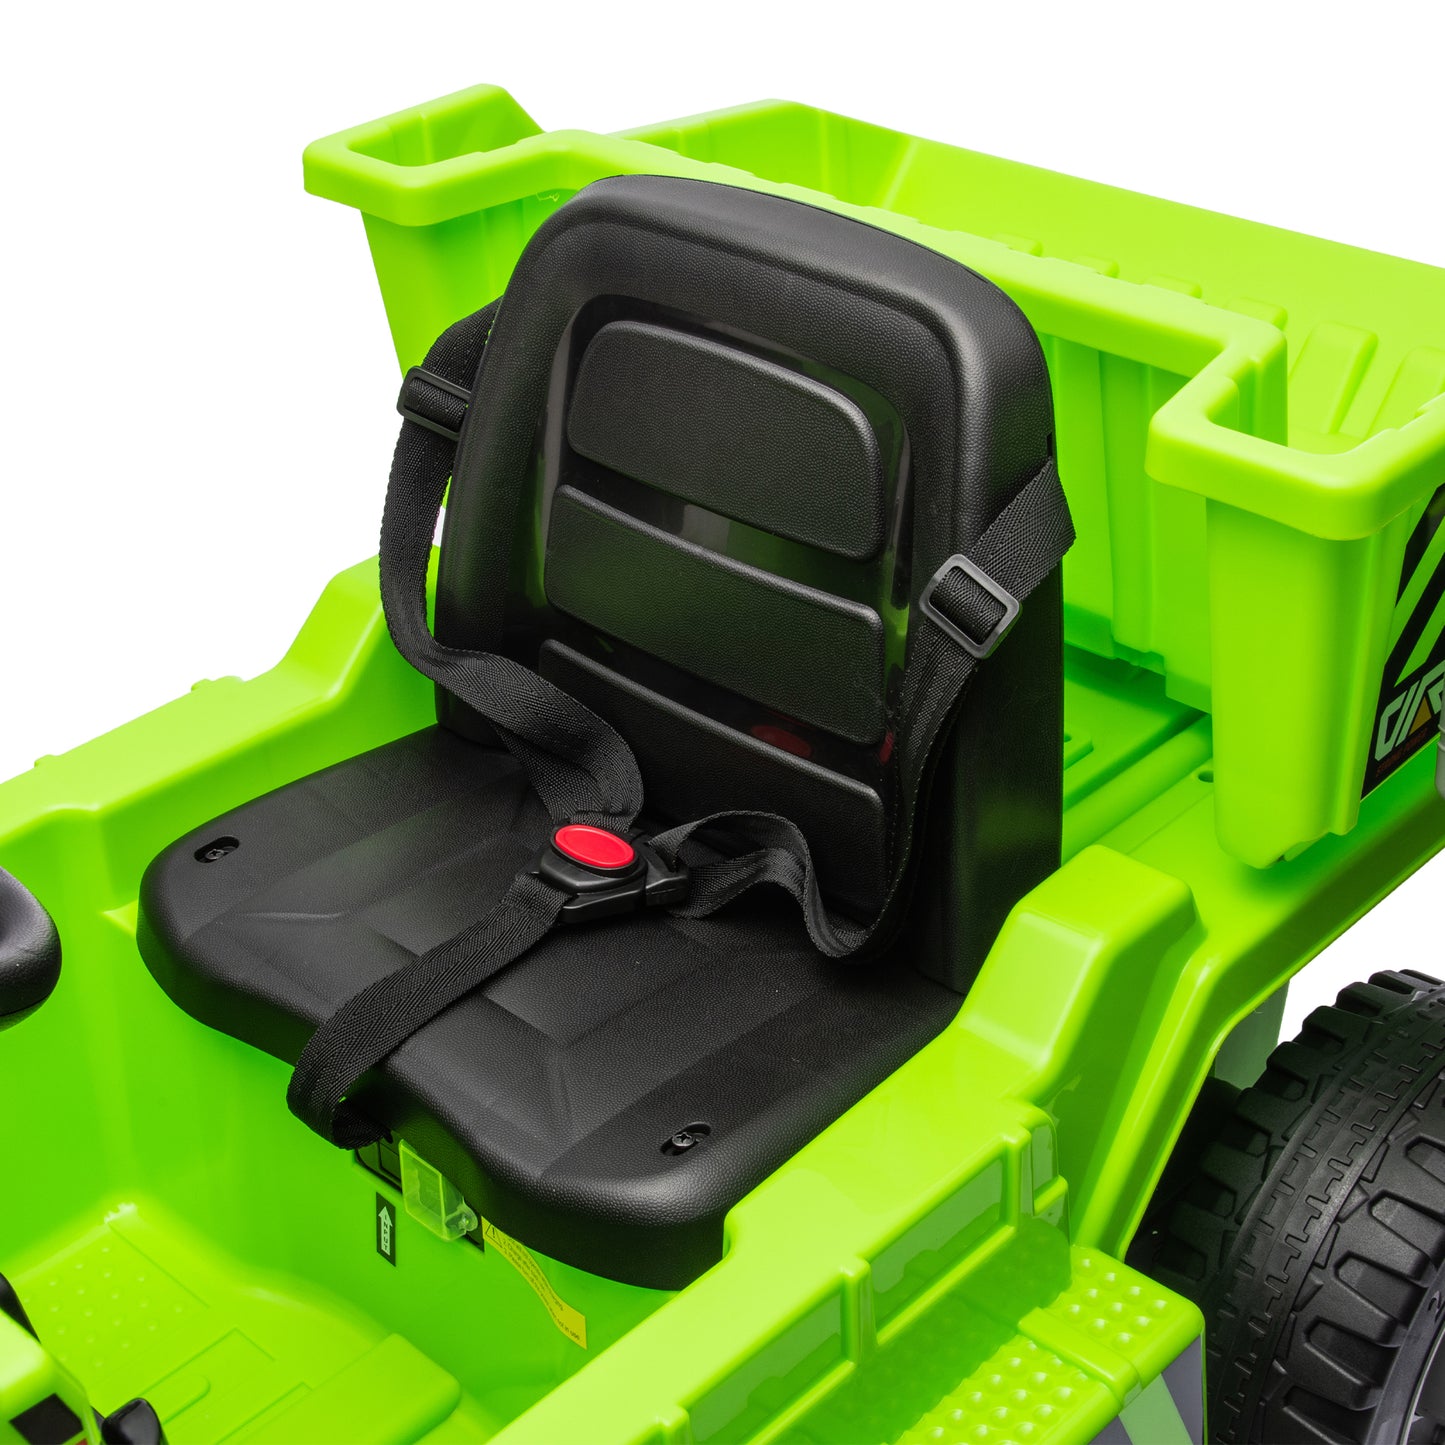 Dump Truck Adventure Ride-On Toy with Parental Control, Electric Dump Bed, Phone Stand, and MP3 Player